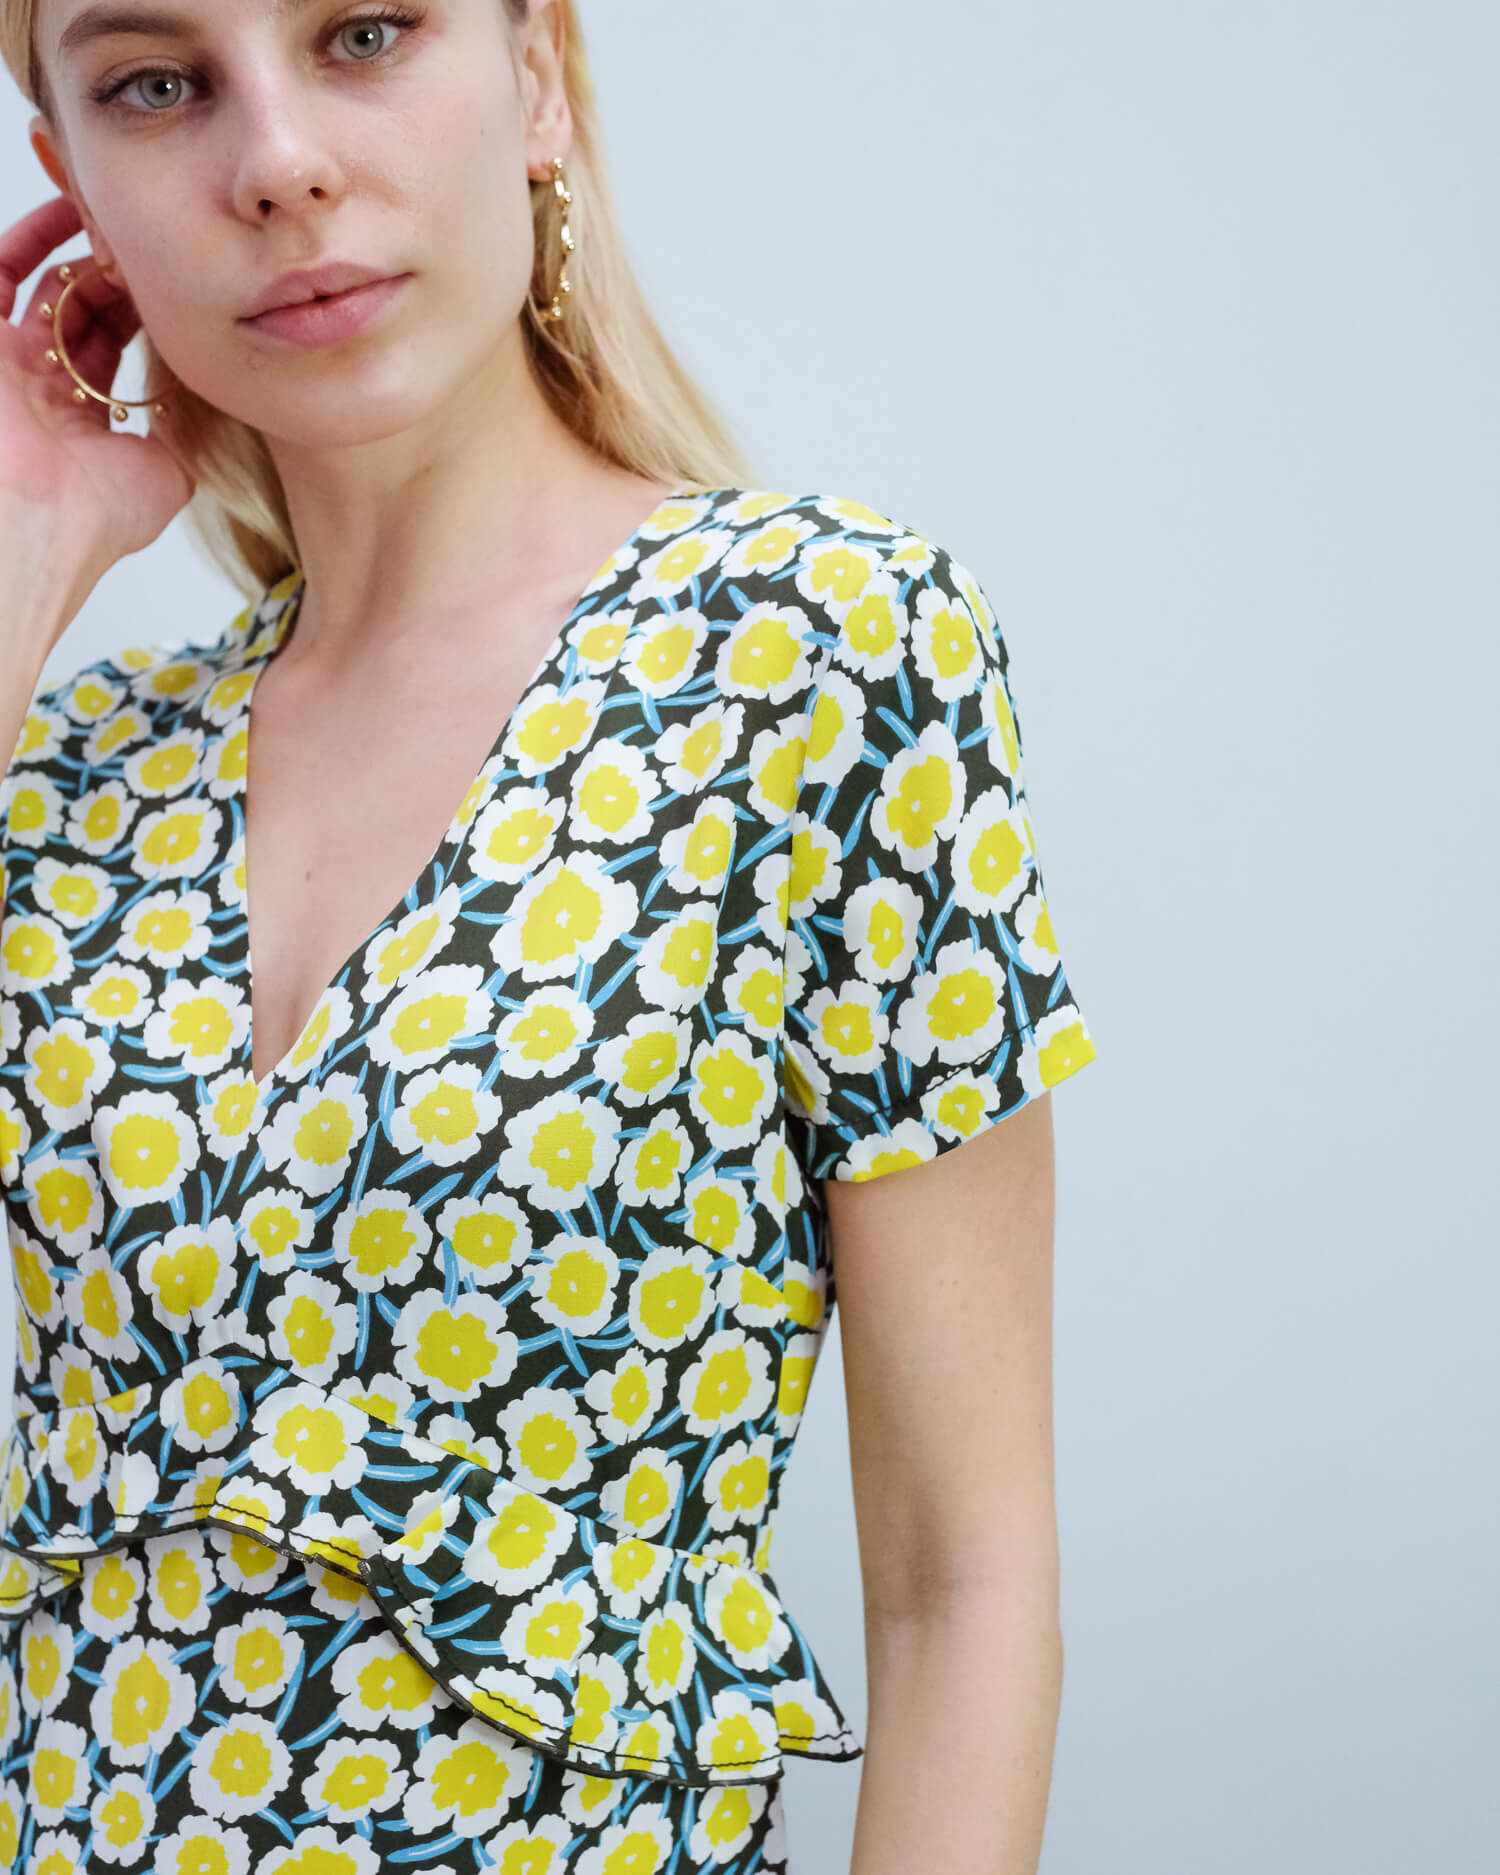 DVF Glenys dress in daisies canteen